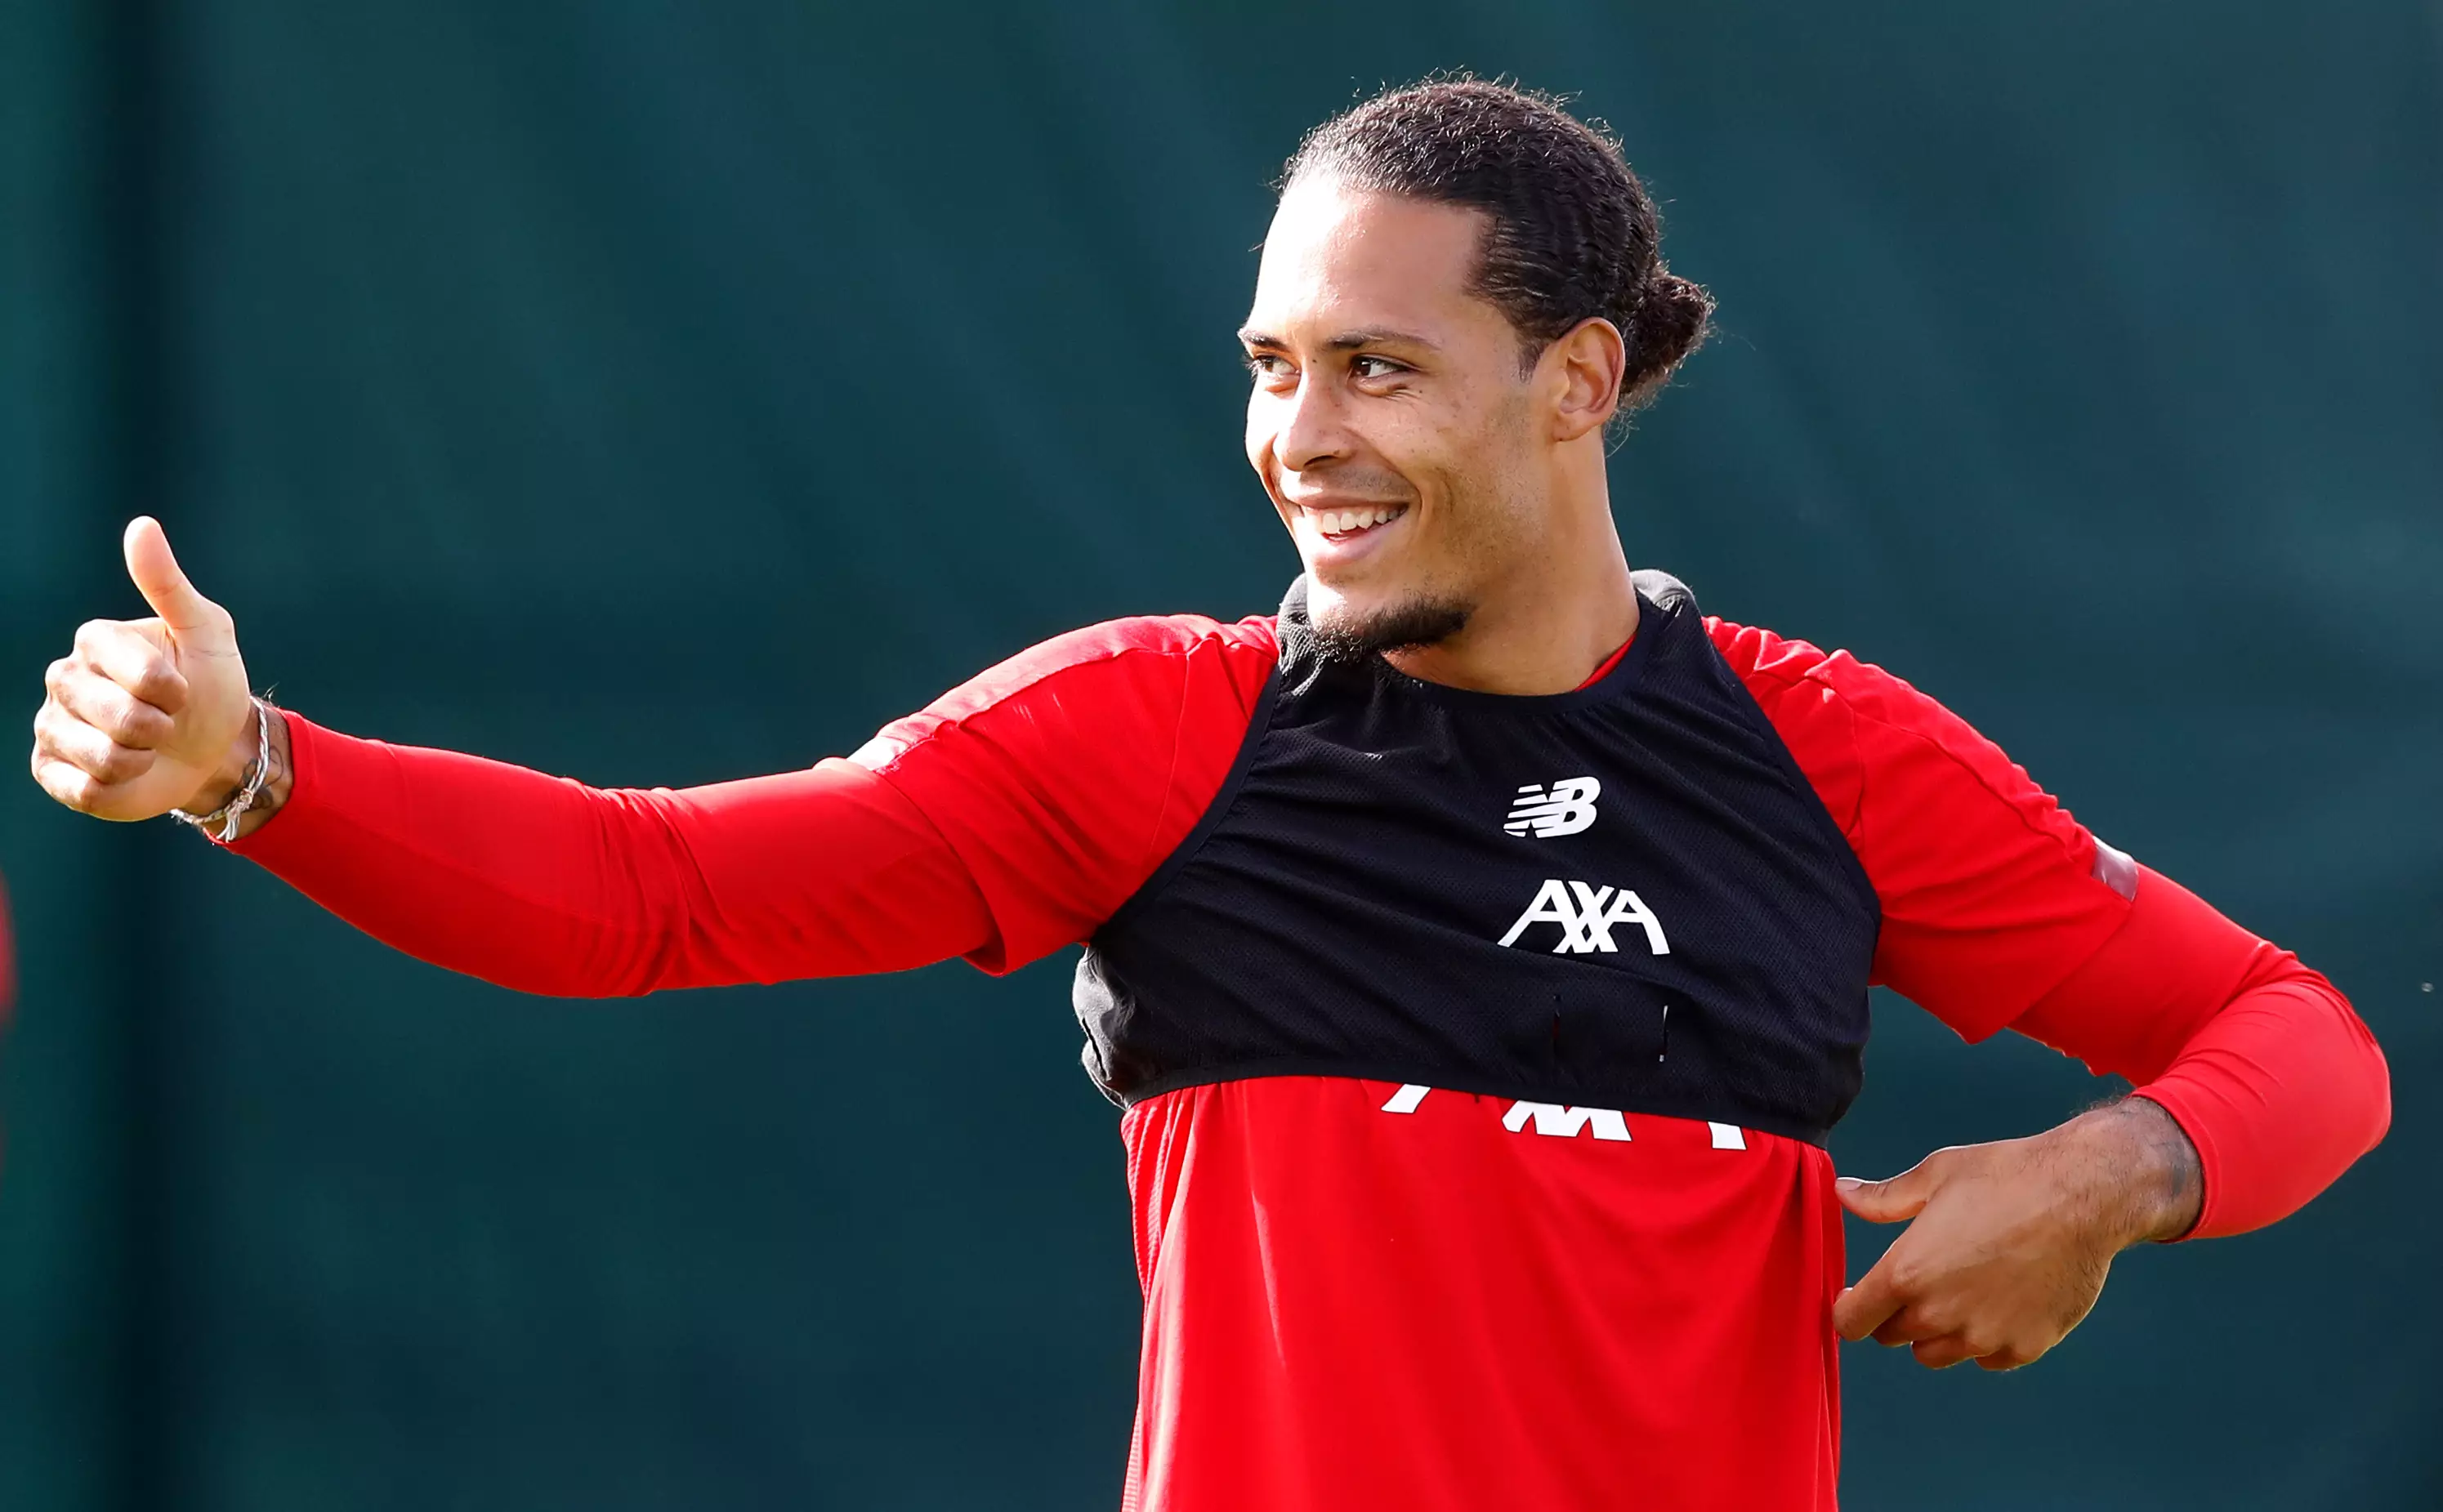 Van Dijk might be named as the best player in the world this month. Image: PA Images